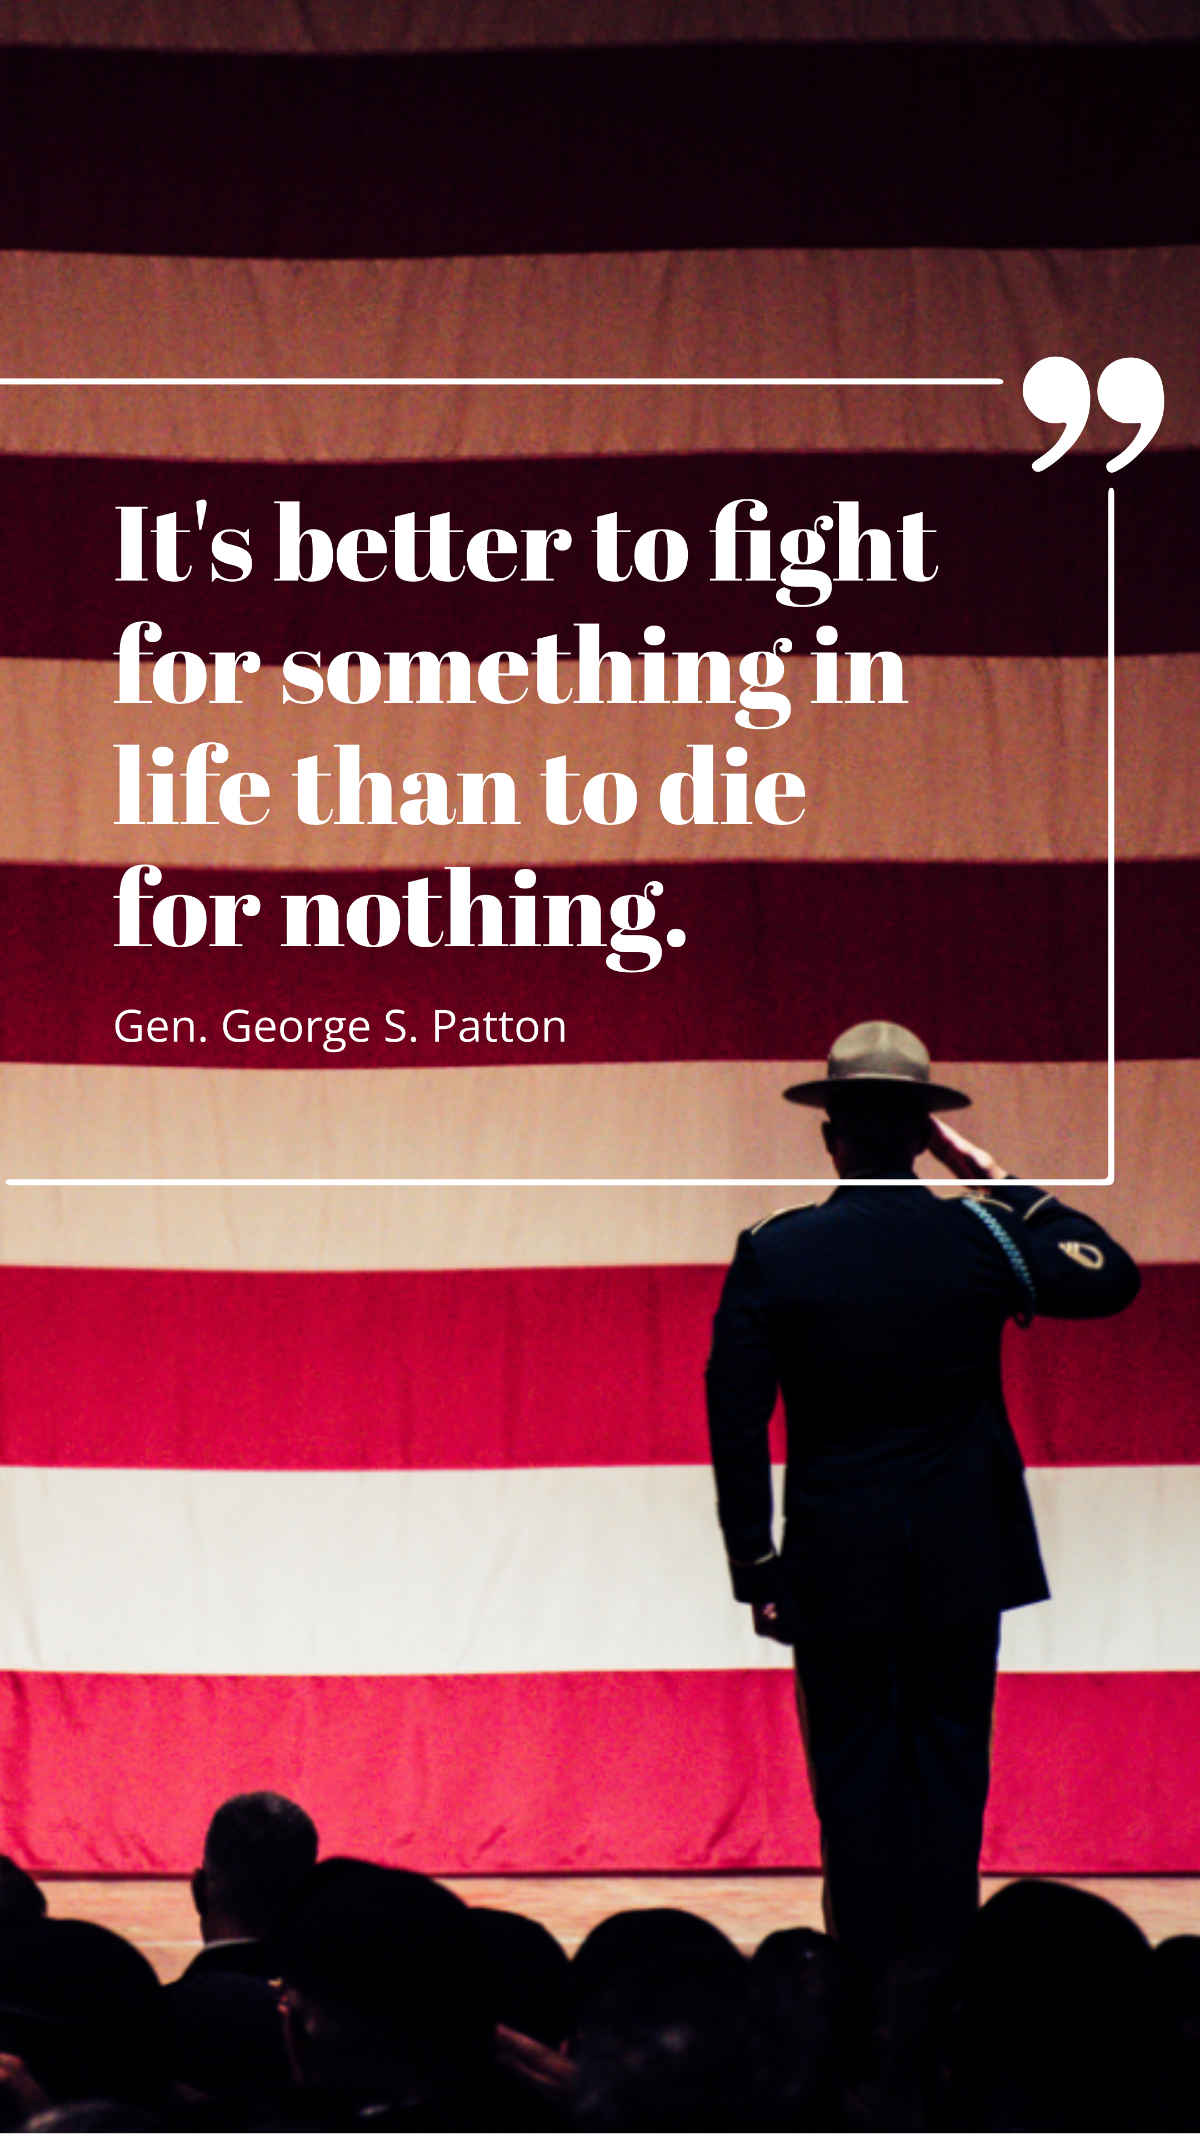 Gen. George S. Patton - It's better to fight for something in life than to die for nothing.